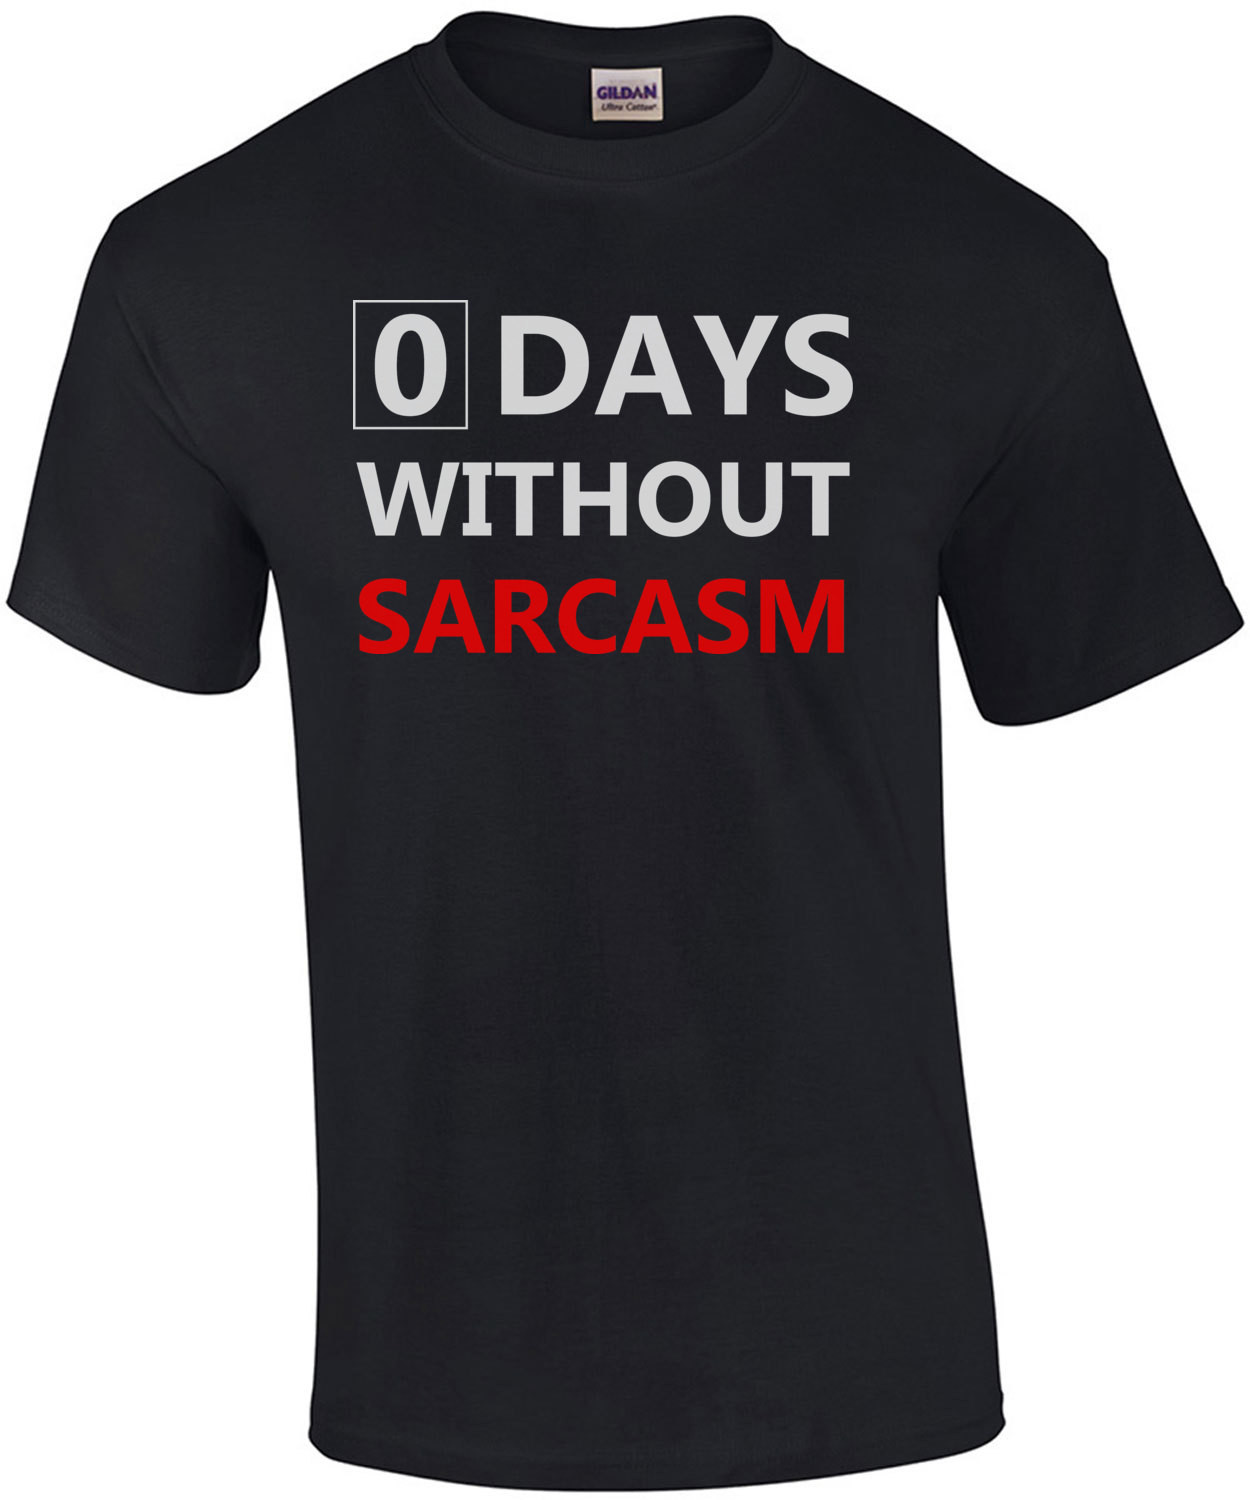 0 days without sarcasm - funny sarcastic